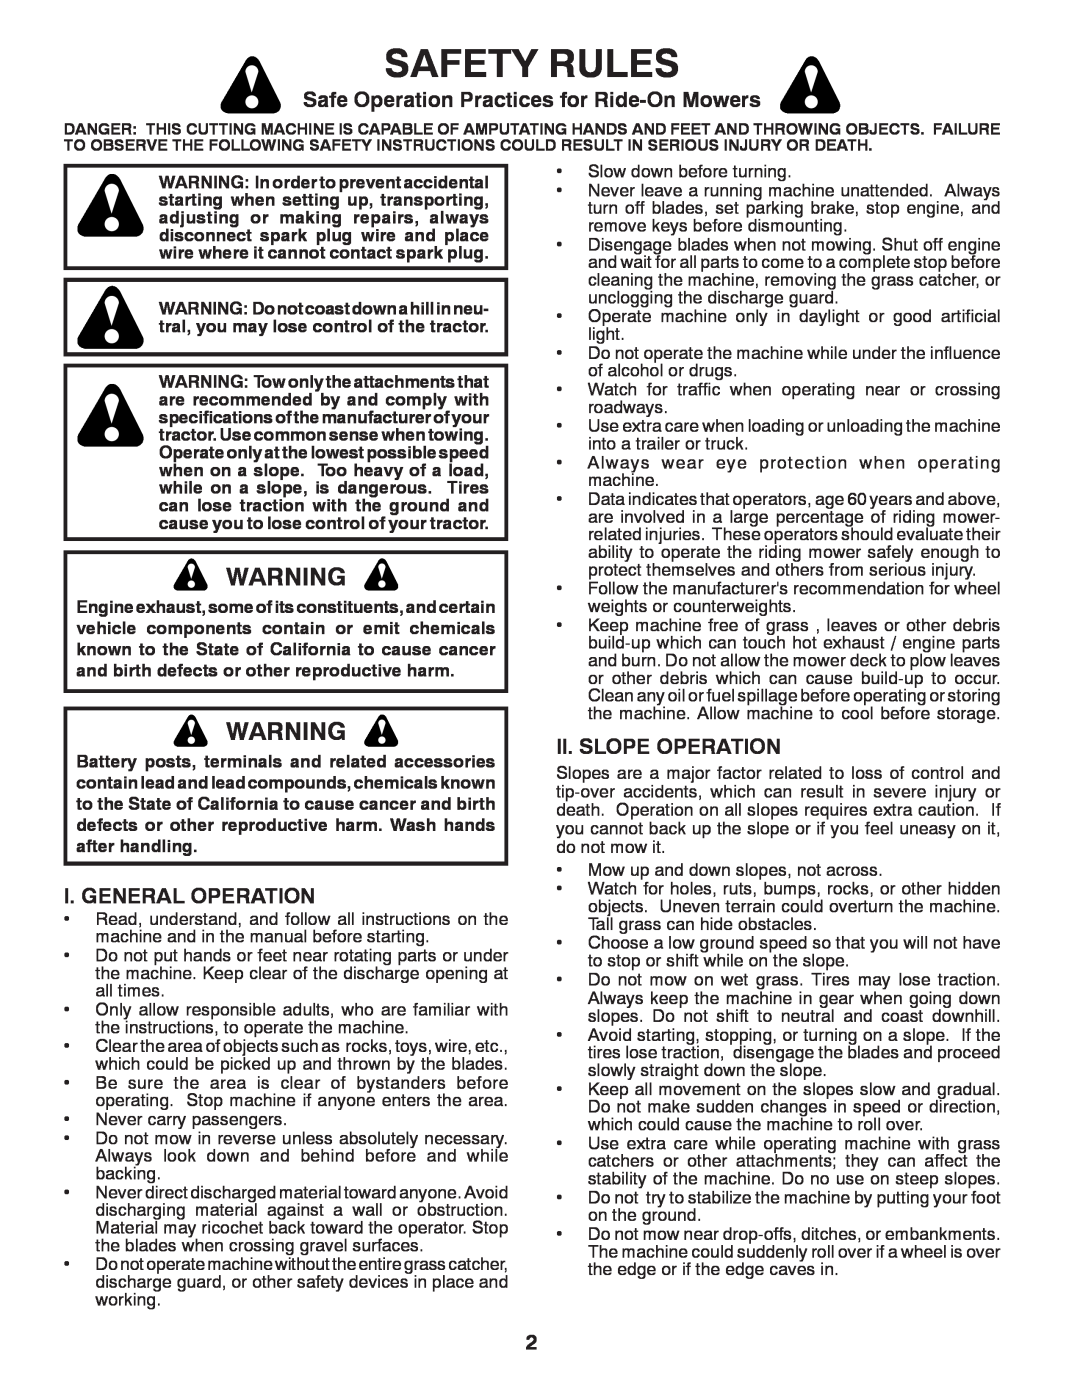 Poulan XT22H54 manual Safety Rules, Safe Operation Practices for Ride-On Mowers, I. General Operation, Ii. Slope Operation 